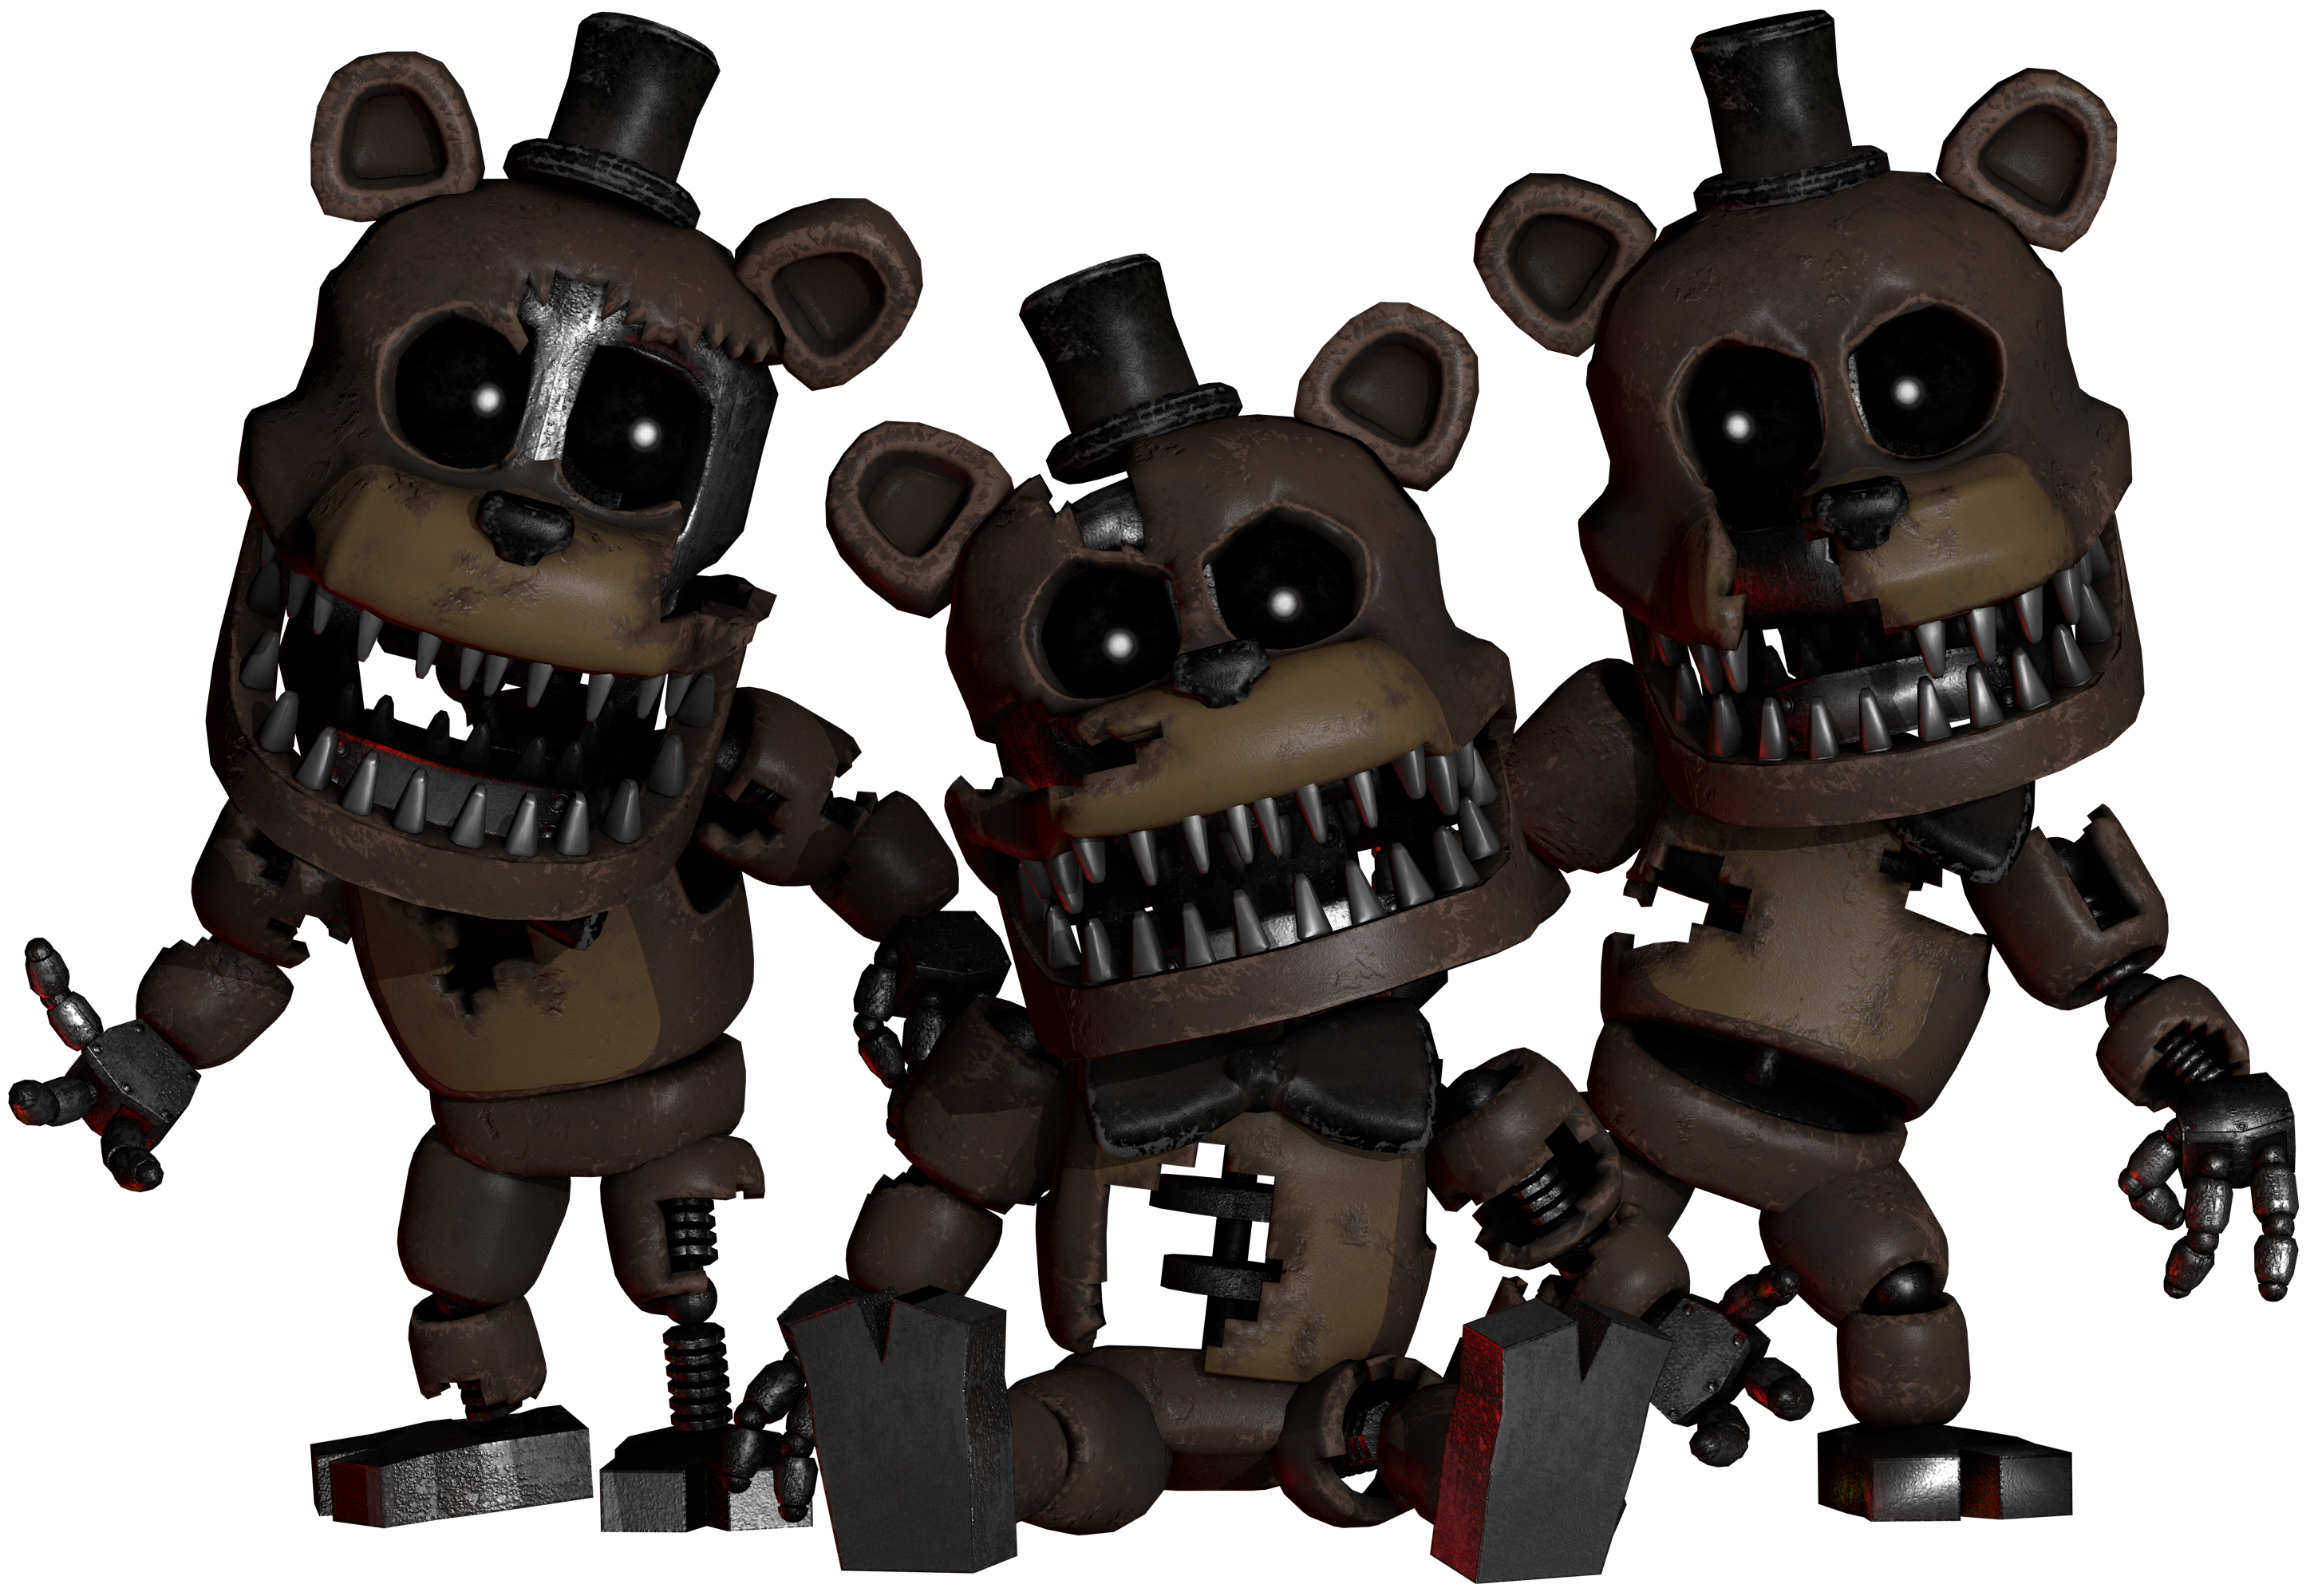 The Nightmare animatronic from Five Nights at Freddy's 4. Only